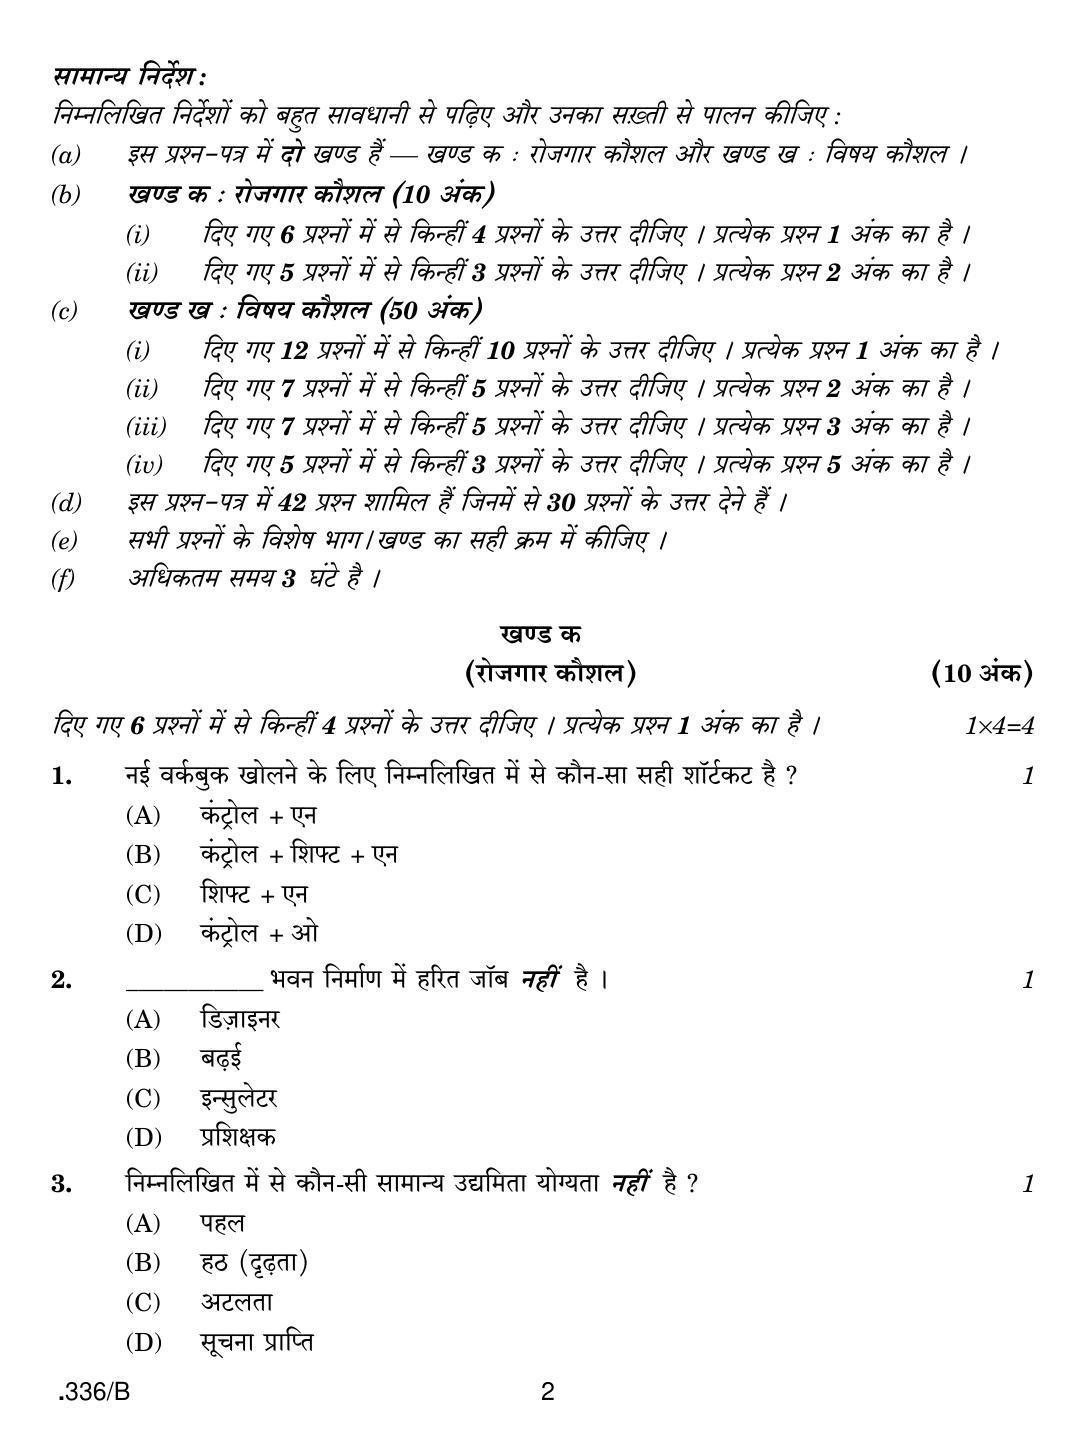 CBSE Class 12 Marketing 2020 Compartment Question Paper - Page 2